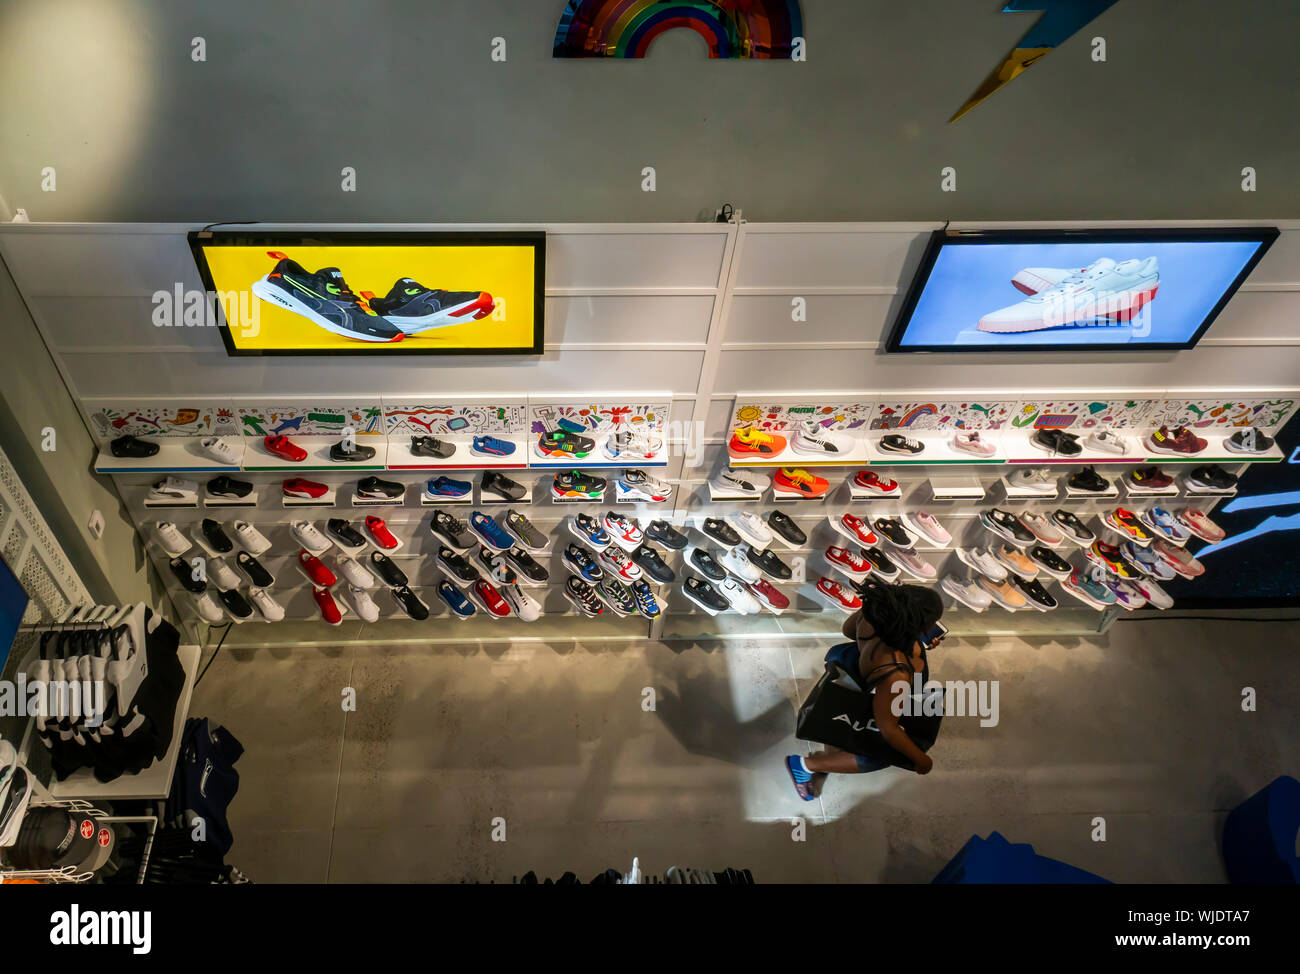 Shoppers and visitors flock to the newly opened Puma flagship store on Fifth Avenue in New York on Thursday, August 29, 2019. The 18,000 square foot, two level store is Puma’s first location in New York. Puma is rated the eleventh largest athletic footwear company in the U.S., all of which are attempting to take market share from number one, Nike. (© Richard B. Levine) Stock Photo